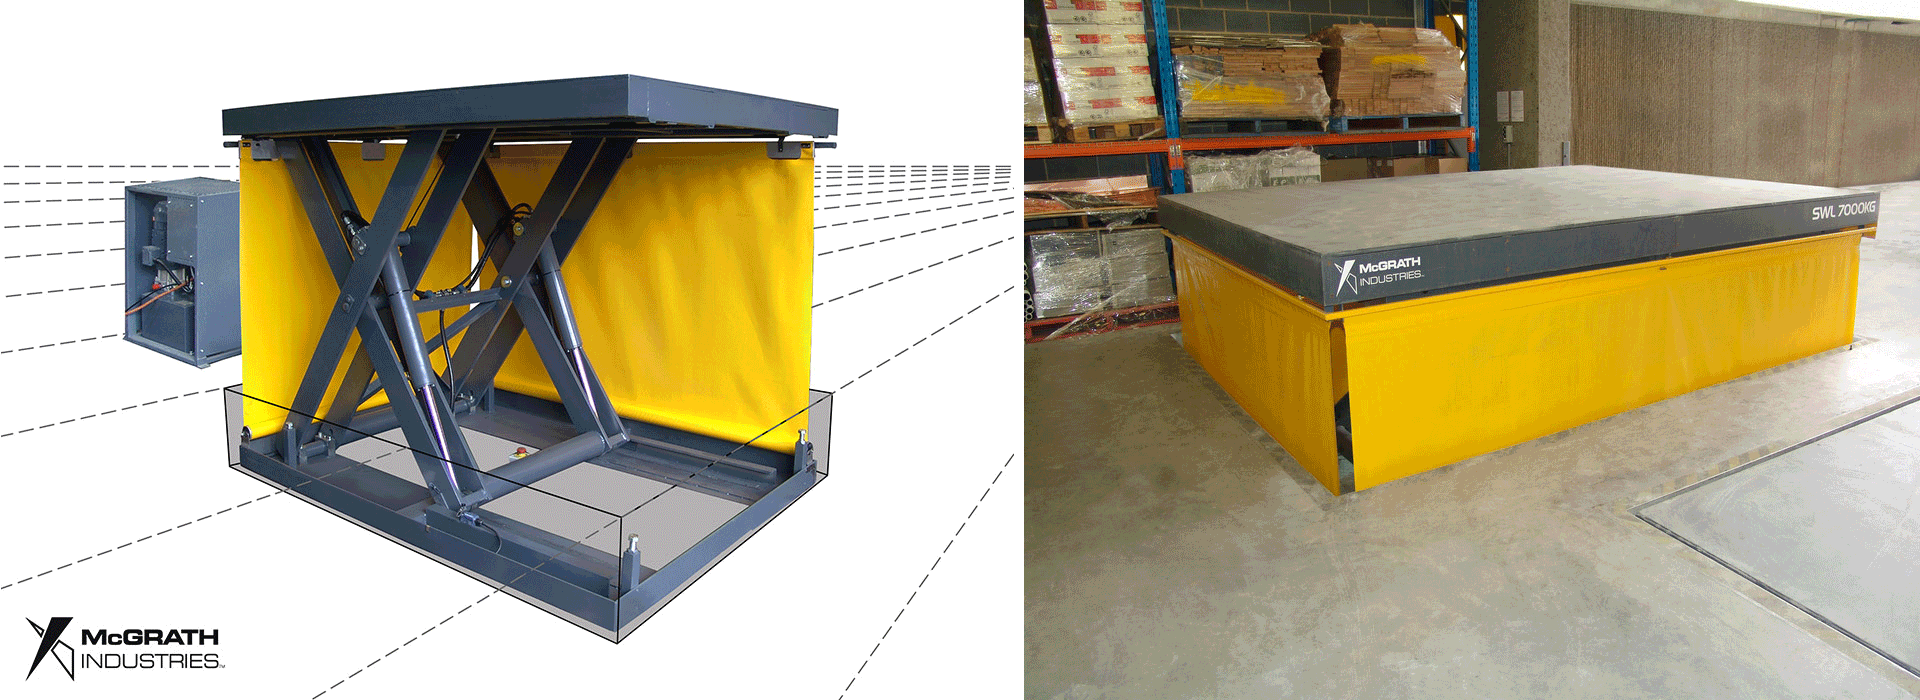 Animation of a Loading Dock Scissor Lift in-floor installation by McGrath Industries of New Zealand